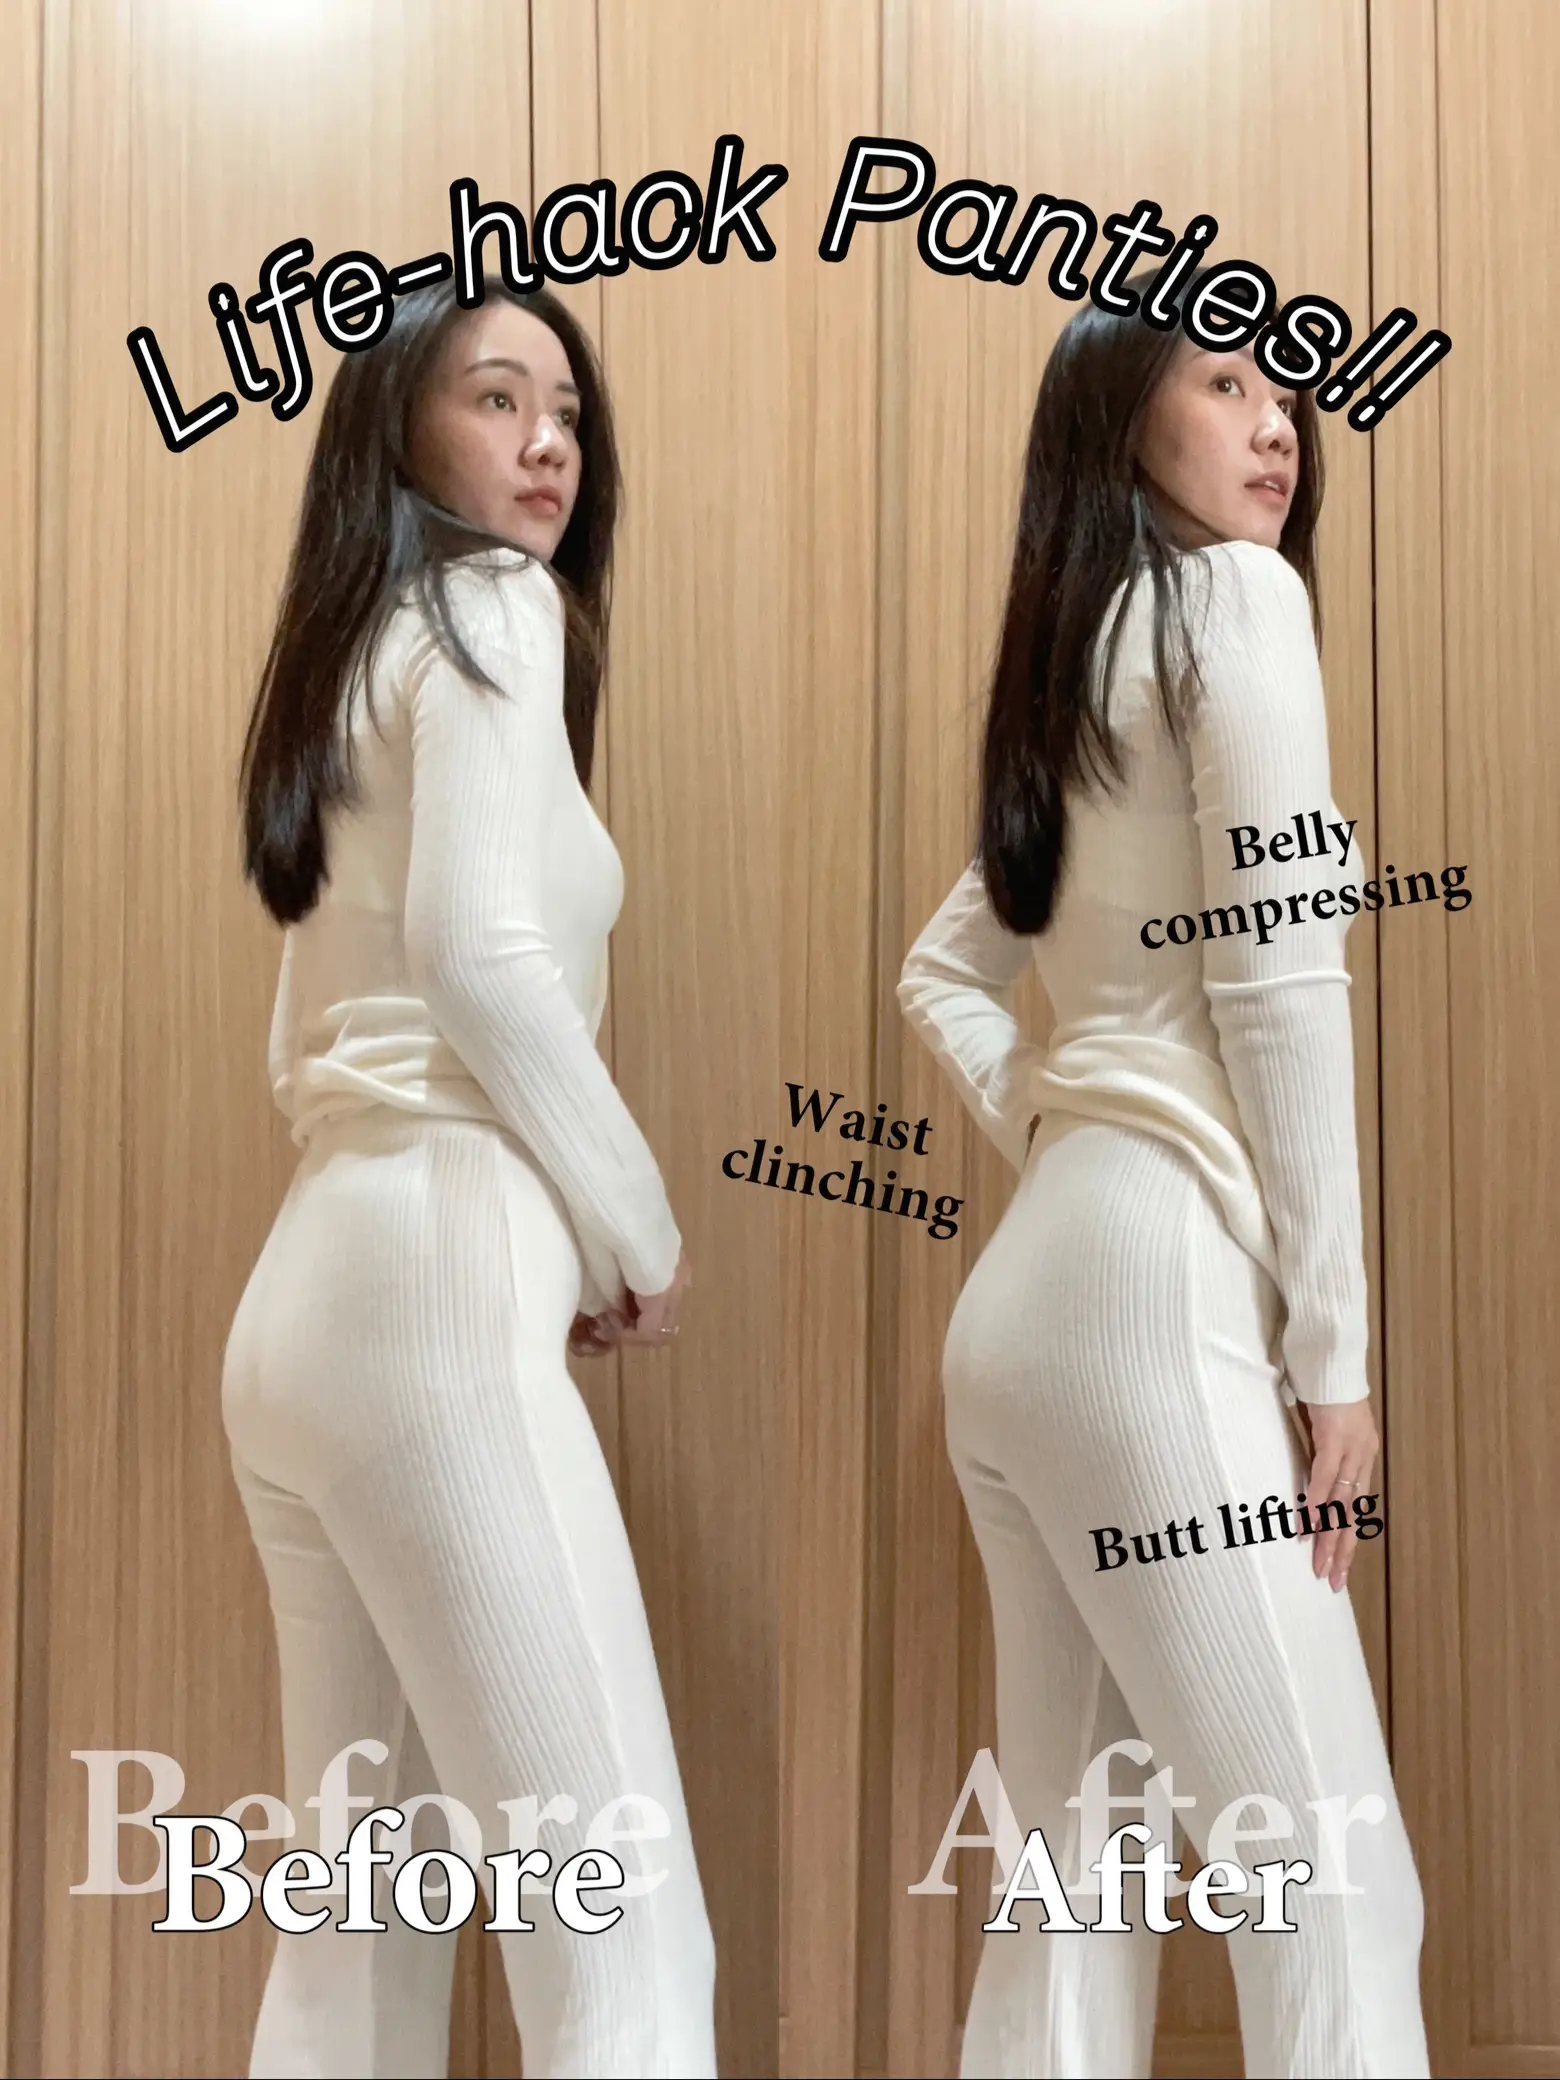 Who's here for the best Butt Lifting and Waist Snatching shapewear? Your  answer is here: ANT-WAIST BOYSHORT and LIFE-HACK PANTIES. M